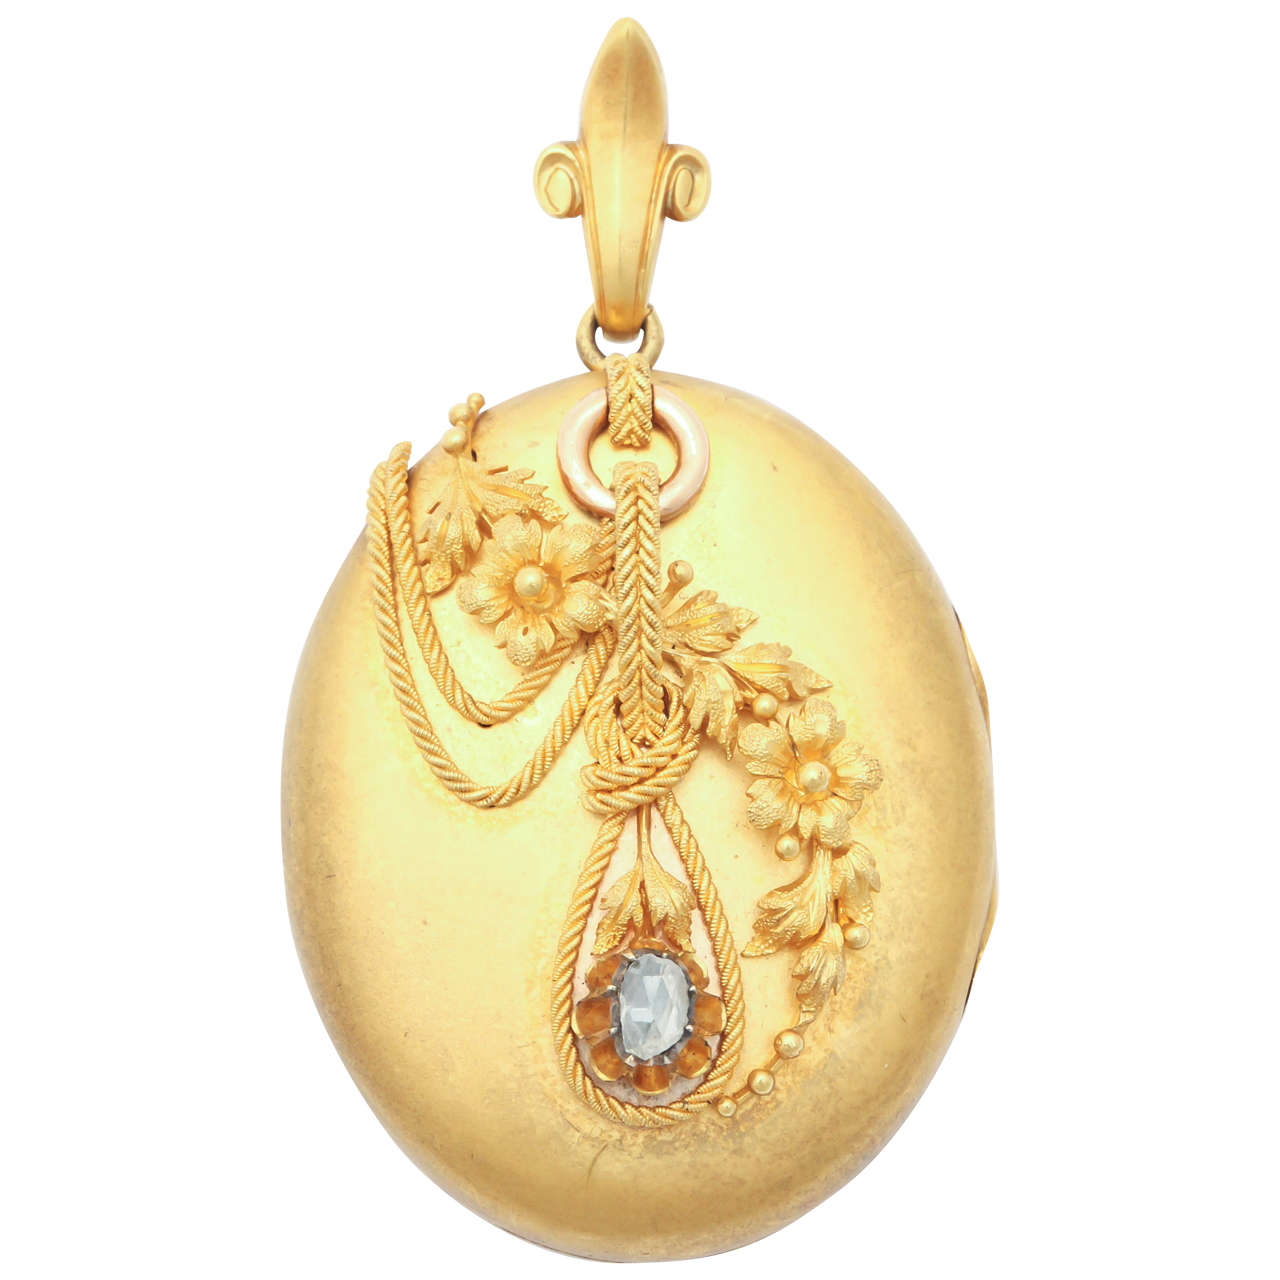 Still Life in a Victorian Gold Locket and the Knot That Binds